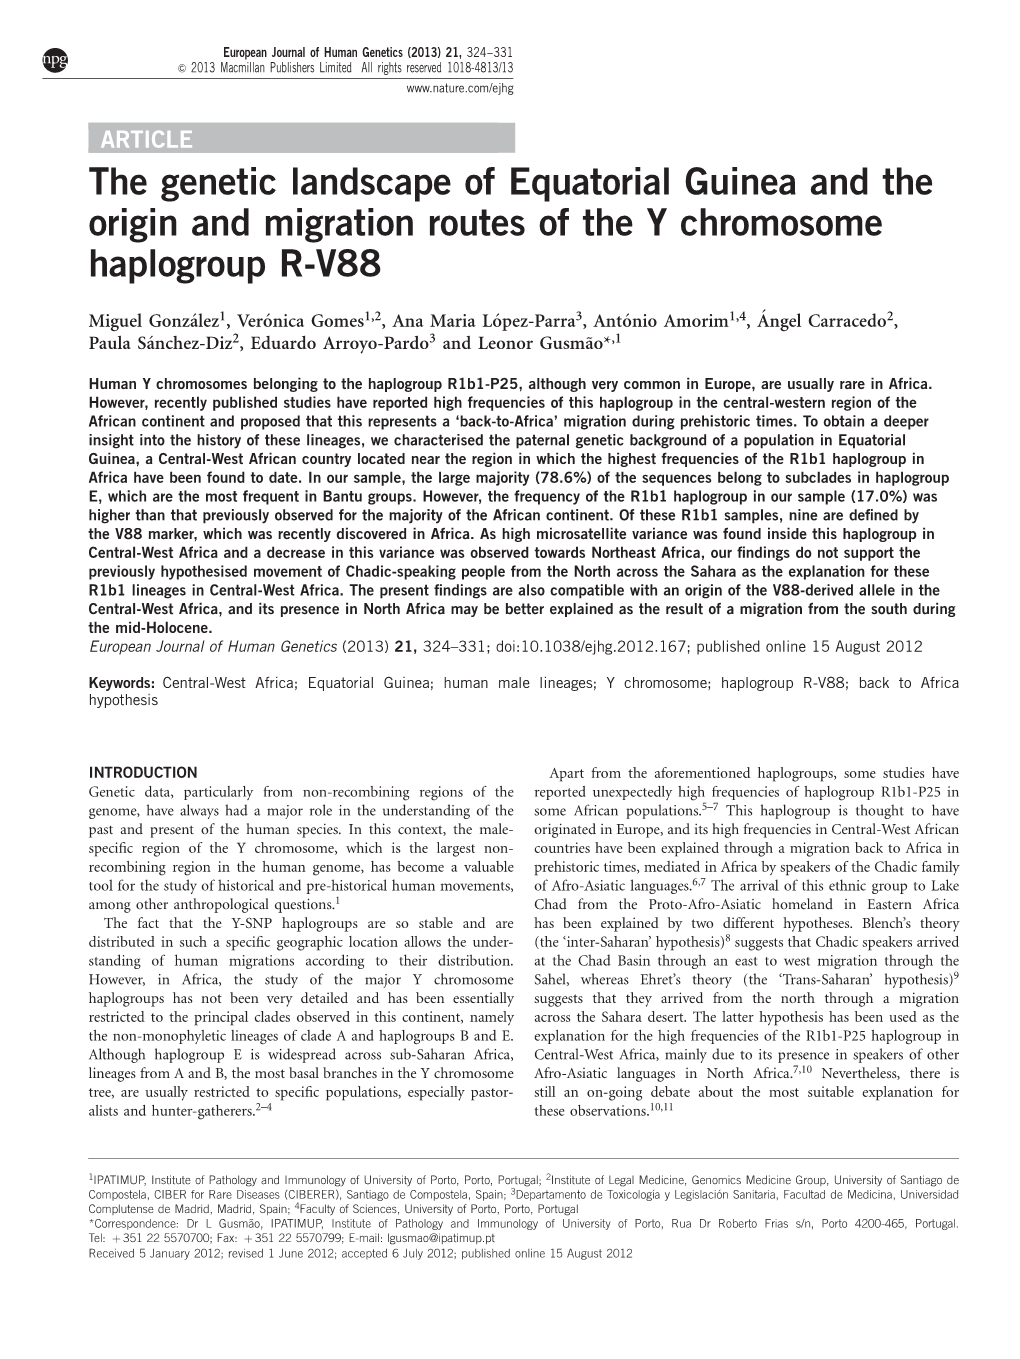 The Genetic Landscape of Equatorial Guinea and the Origin and Migration Routes of the Y Chromosome Haplogroup R-V88